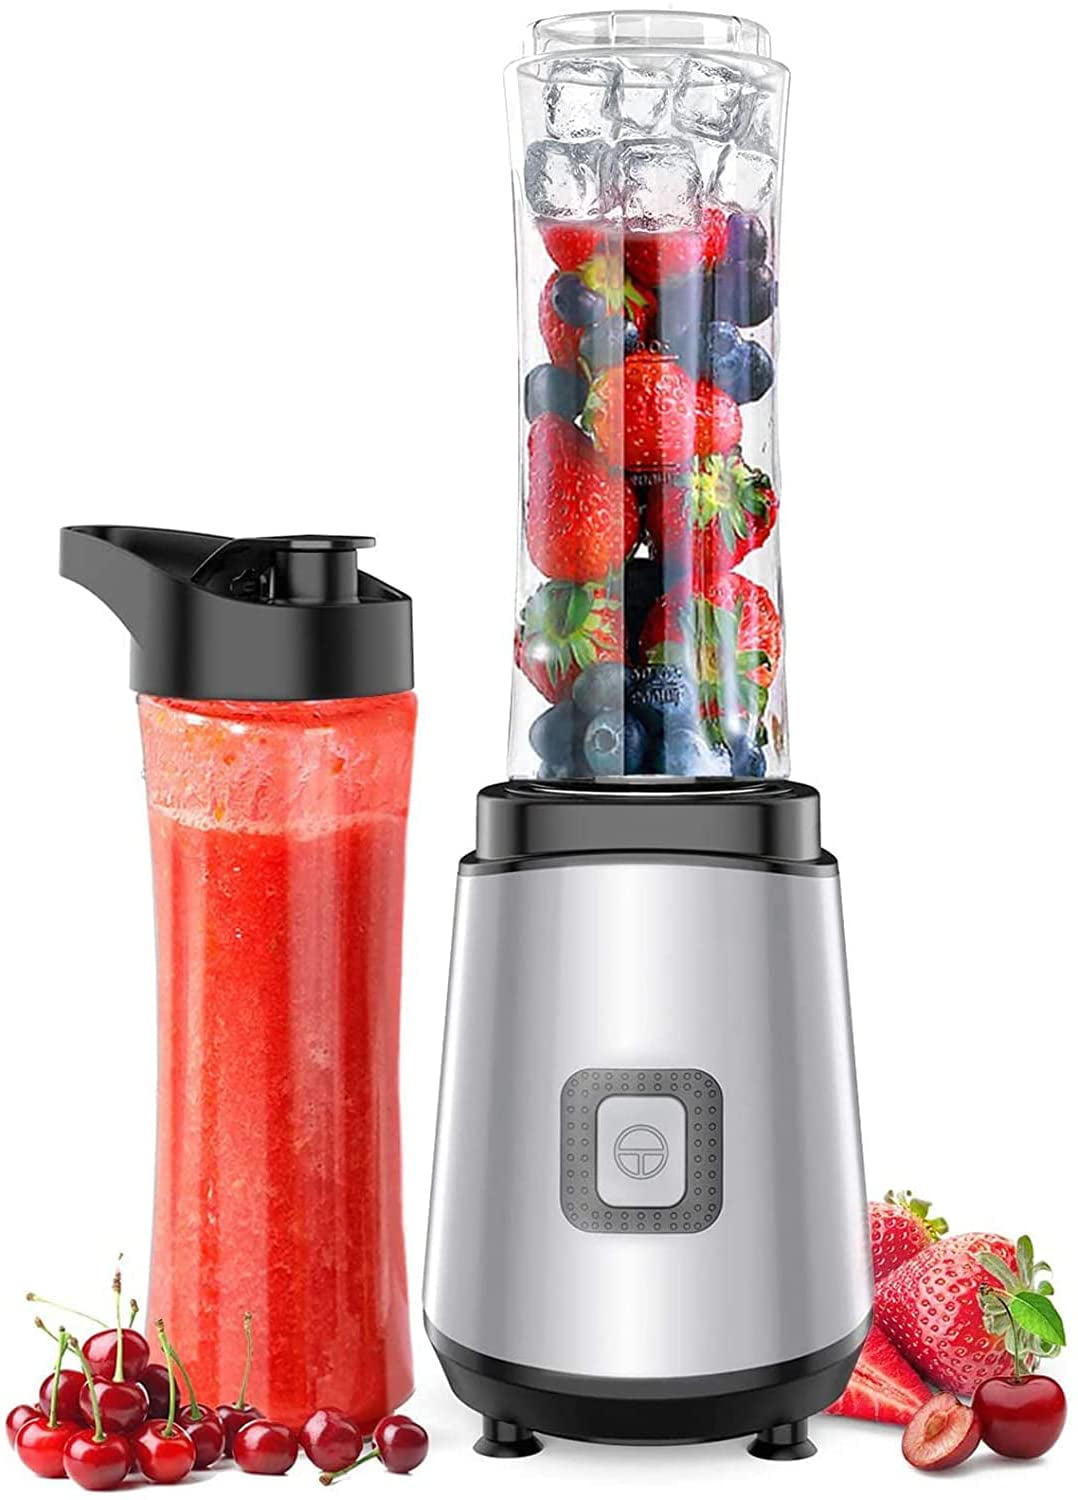 Housiwill Smoothie Blender, Blender for Shakes and Smoothies, 350W